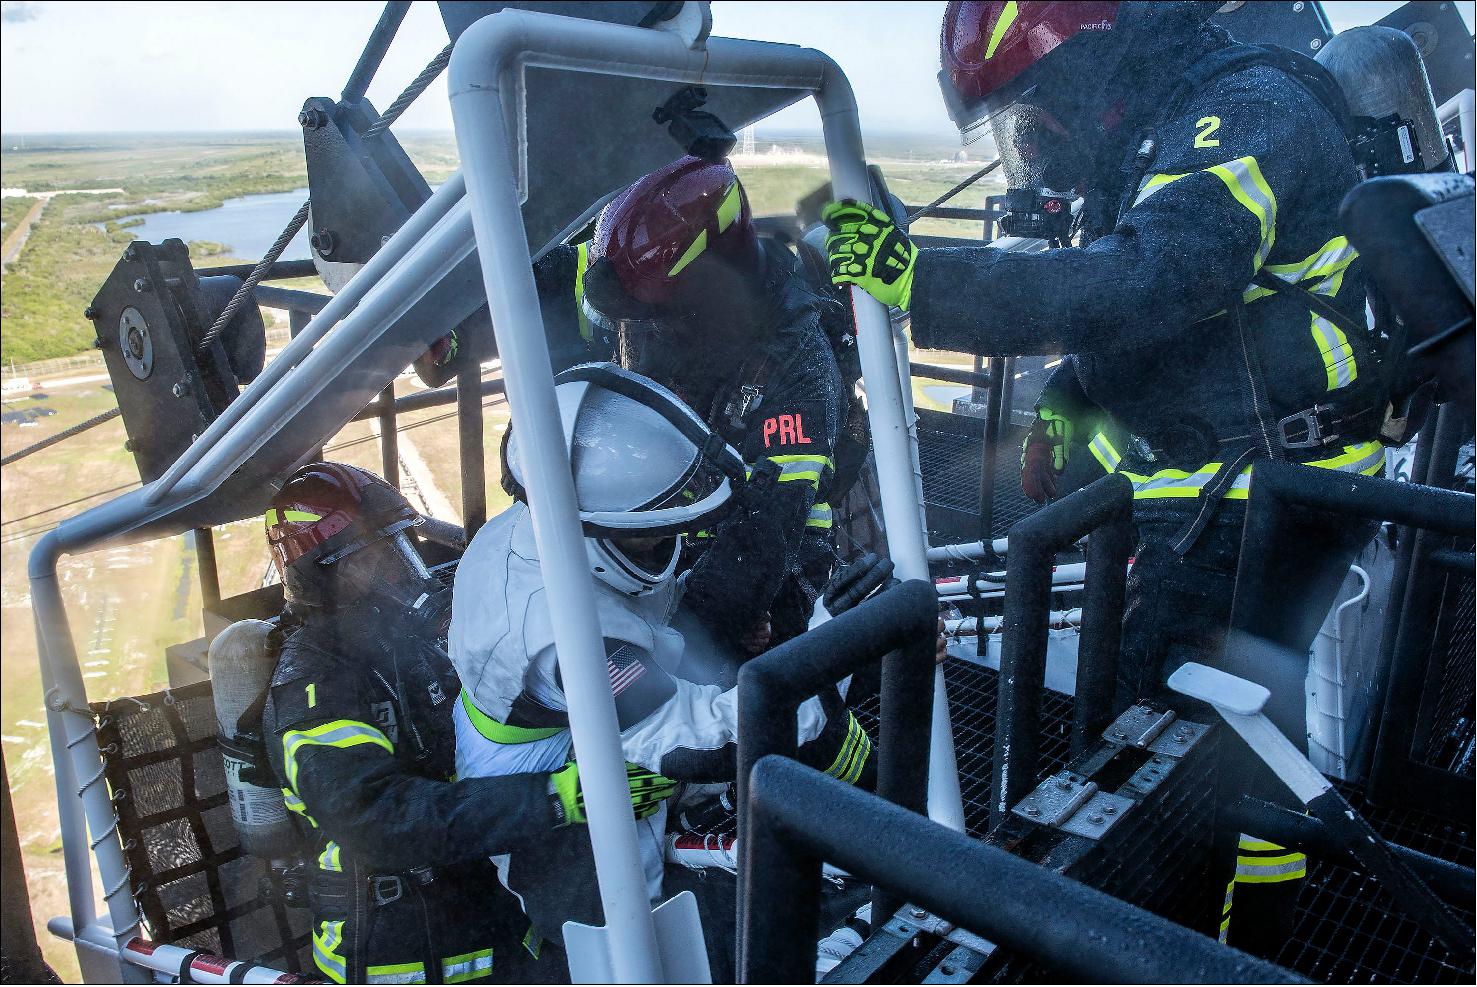 Figure 20: Photo of the pad’s slidewire basket with the rescue team (photo credit: SpaceX)